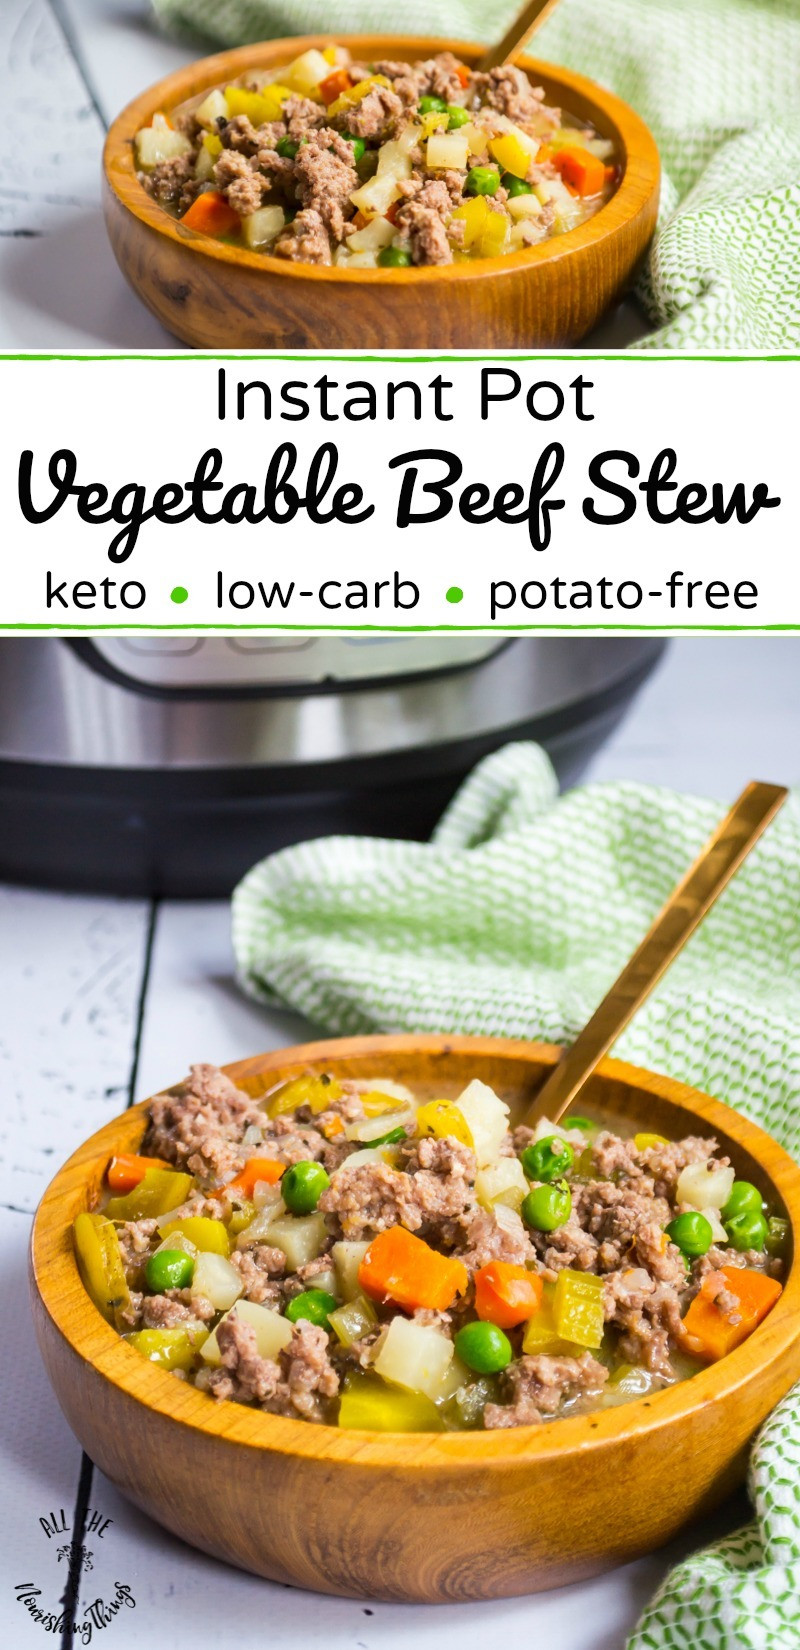 Instant Pot Ground Beef Keto
 Instant Pot Ve able Beef Stew keto Whole30 potato free